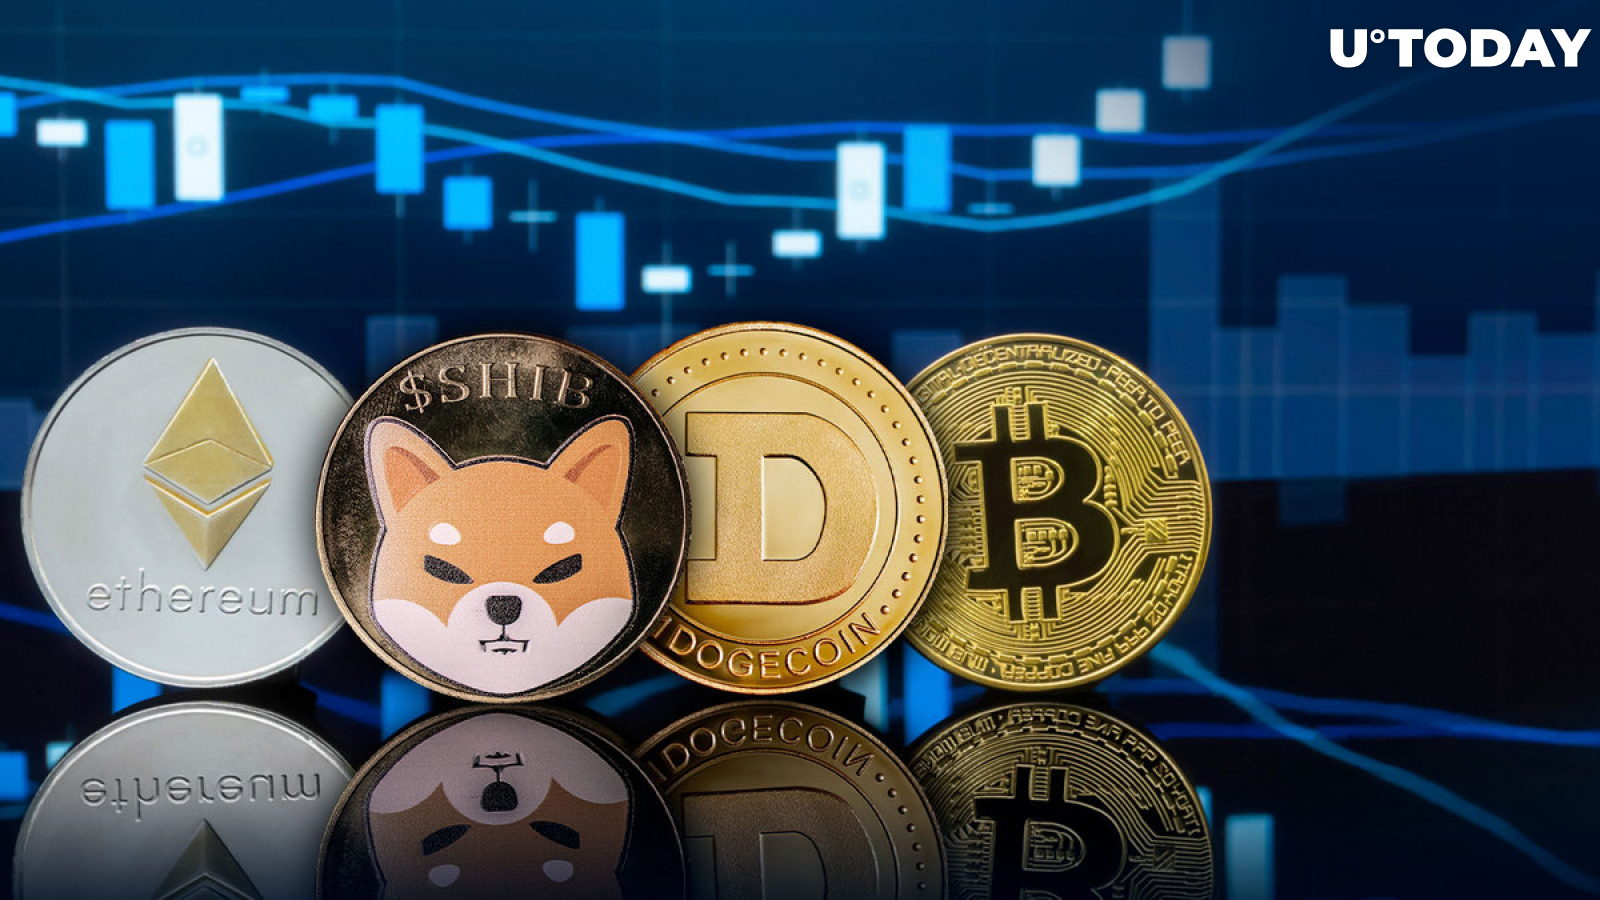 SHIB, DOGE, BTC, ETH Now Part of Groundbreaking New Service for Managing Finances